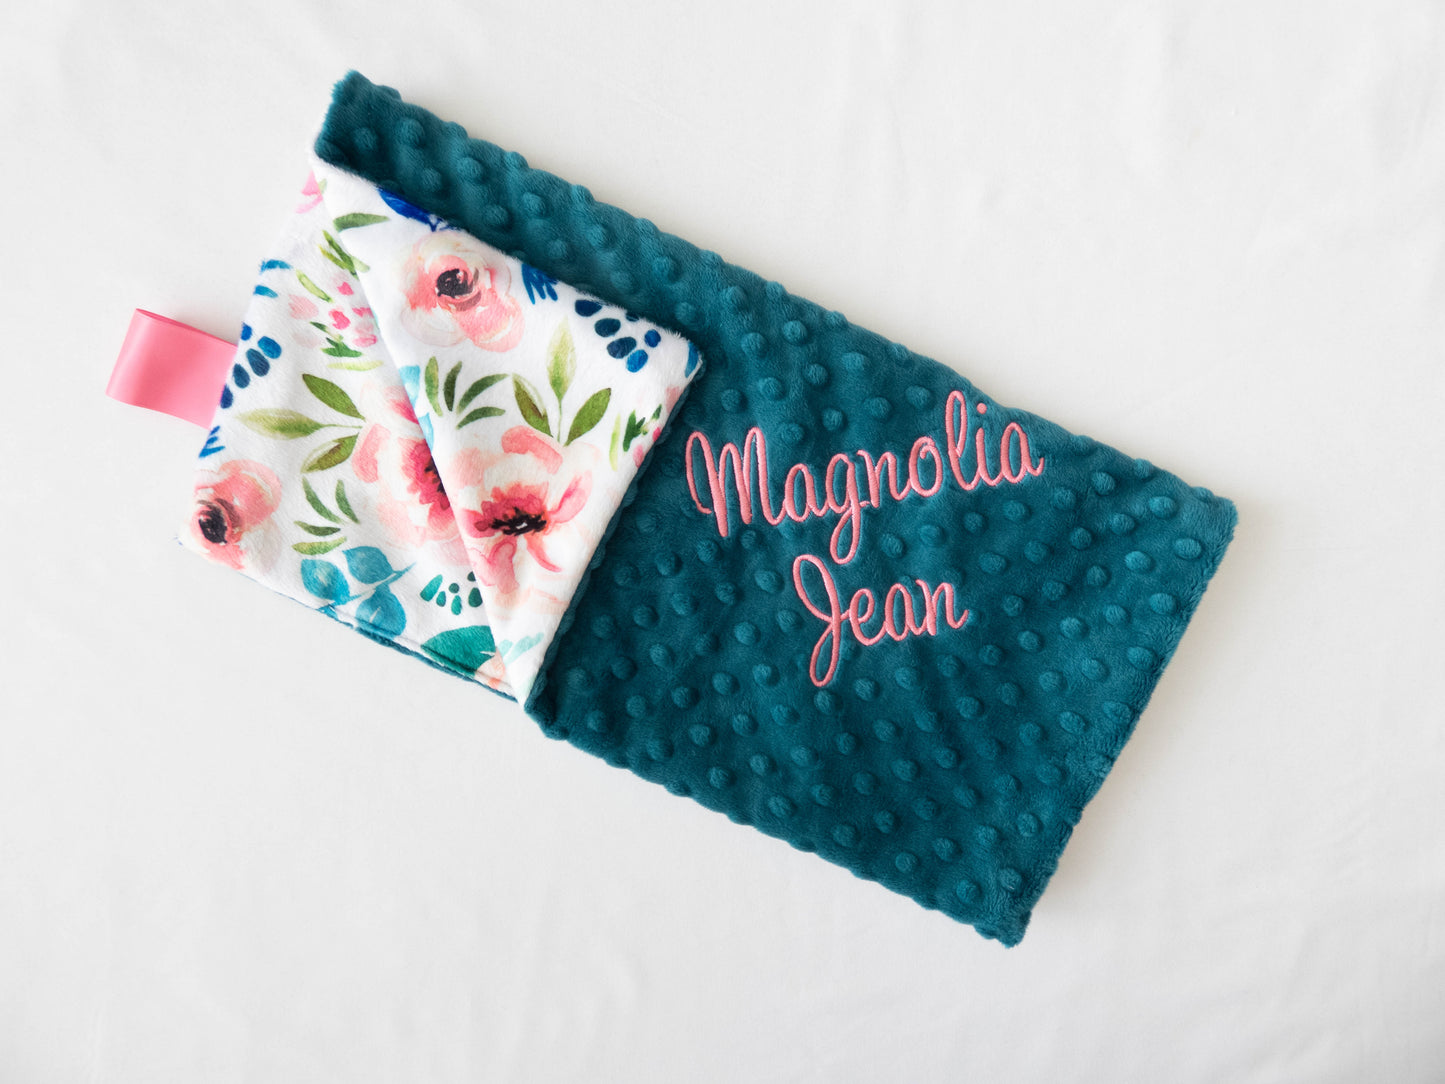 Avaleigh Floral Personalized Baby Blanket